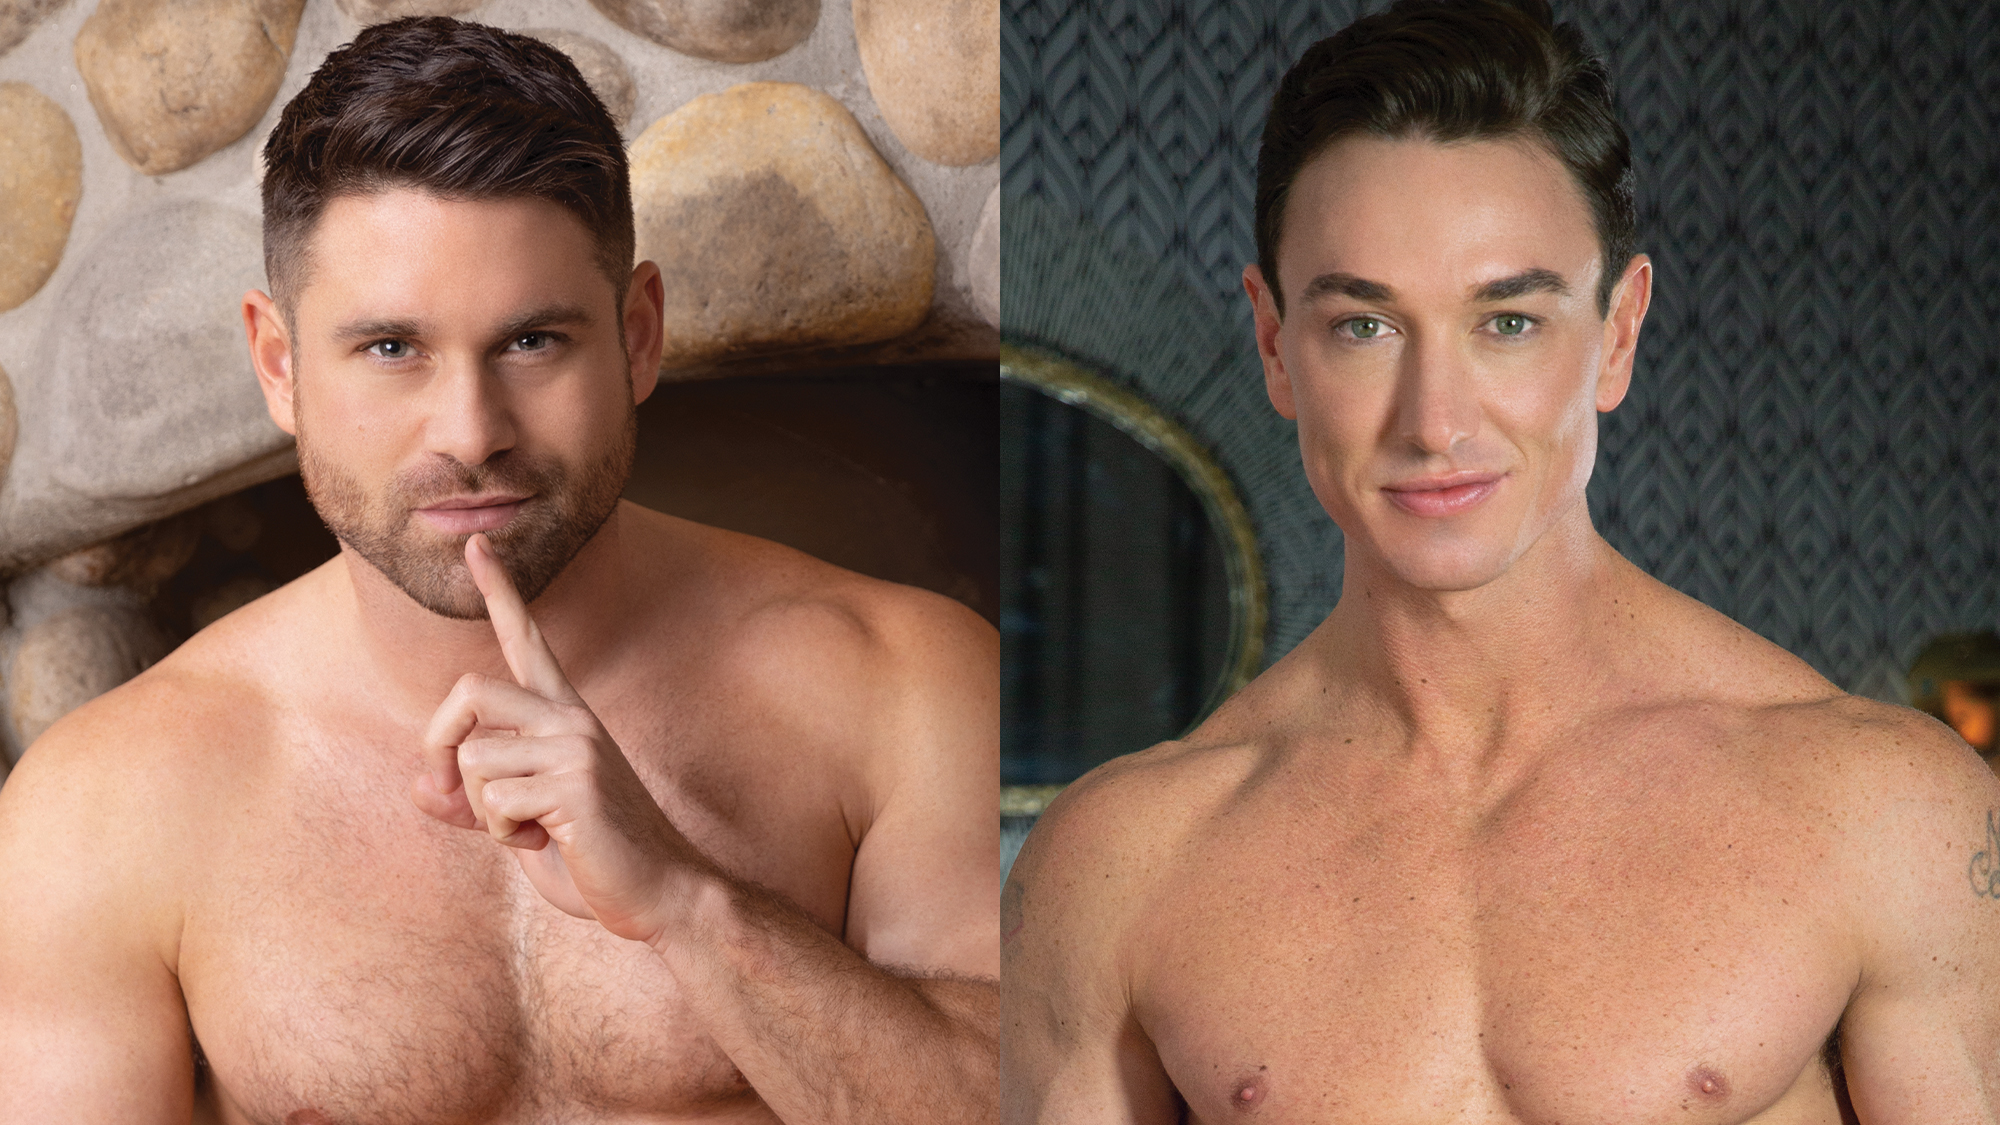 Gay Porn Actresses - Beau Butler, Cade Maddox Top List Of Most Popular Gay Porn Stars -  TheSword.com